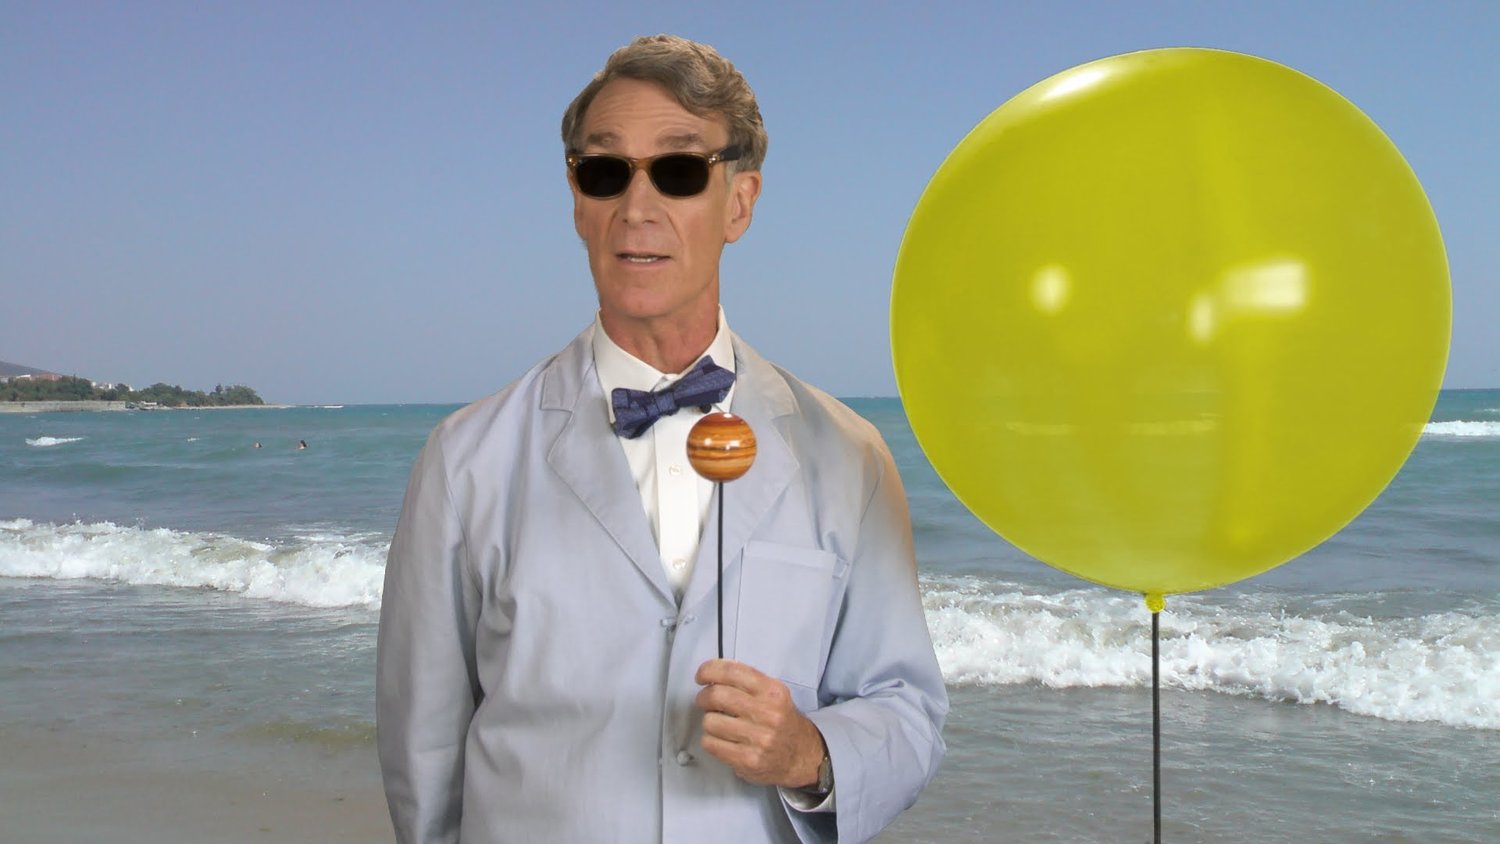 Netflix Announces Talk Show With Bill Nye The Science Guy